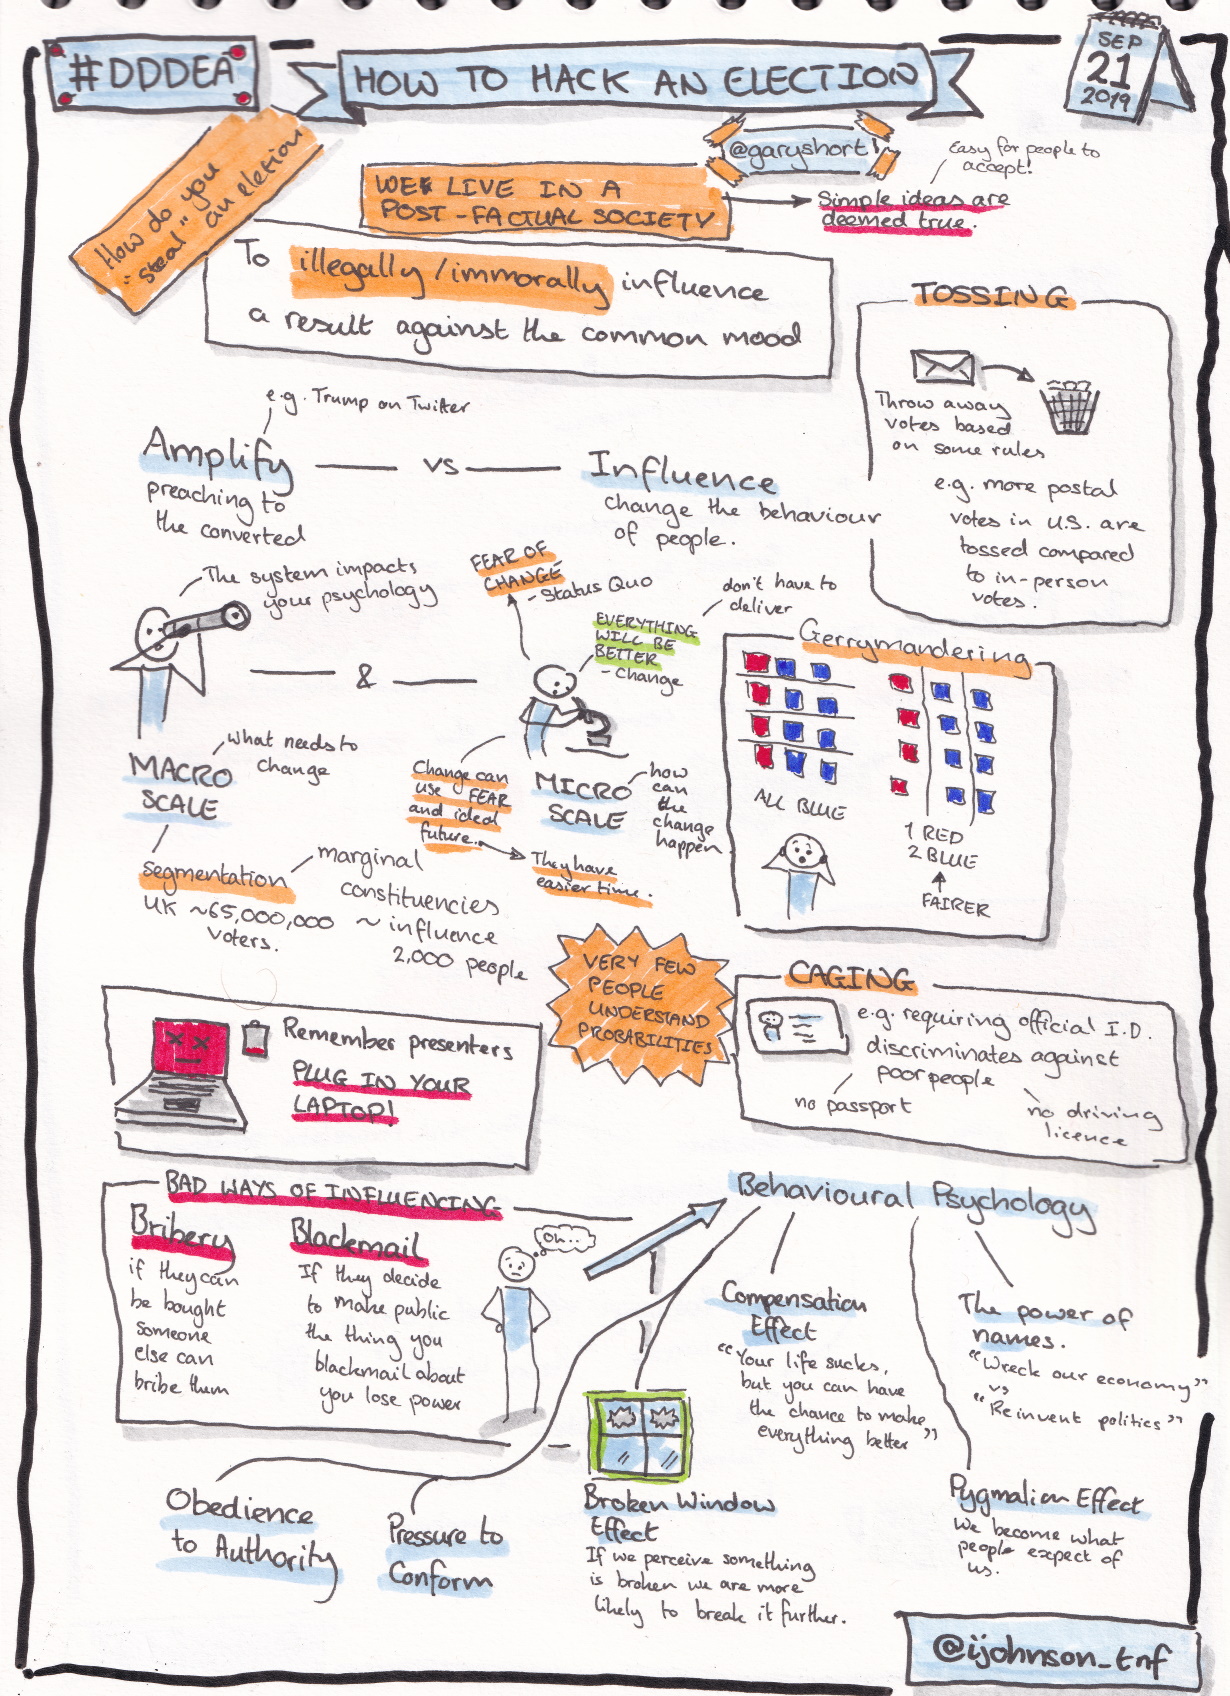 Sketchnotes from the talk 'How to hack an election' by Gary Short